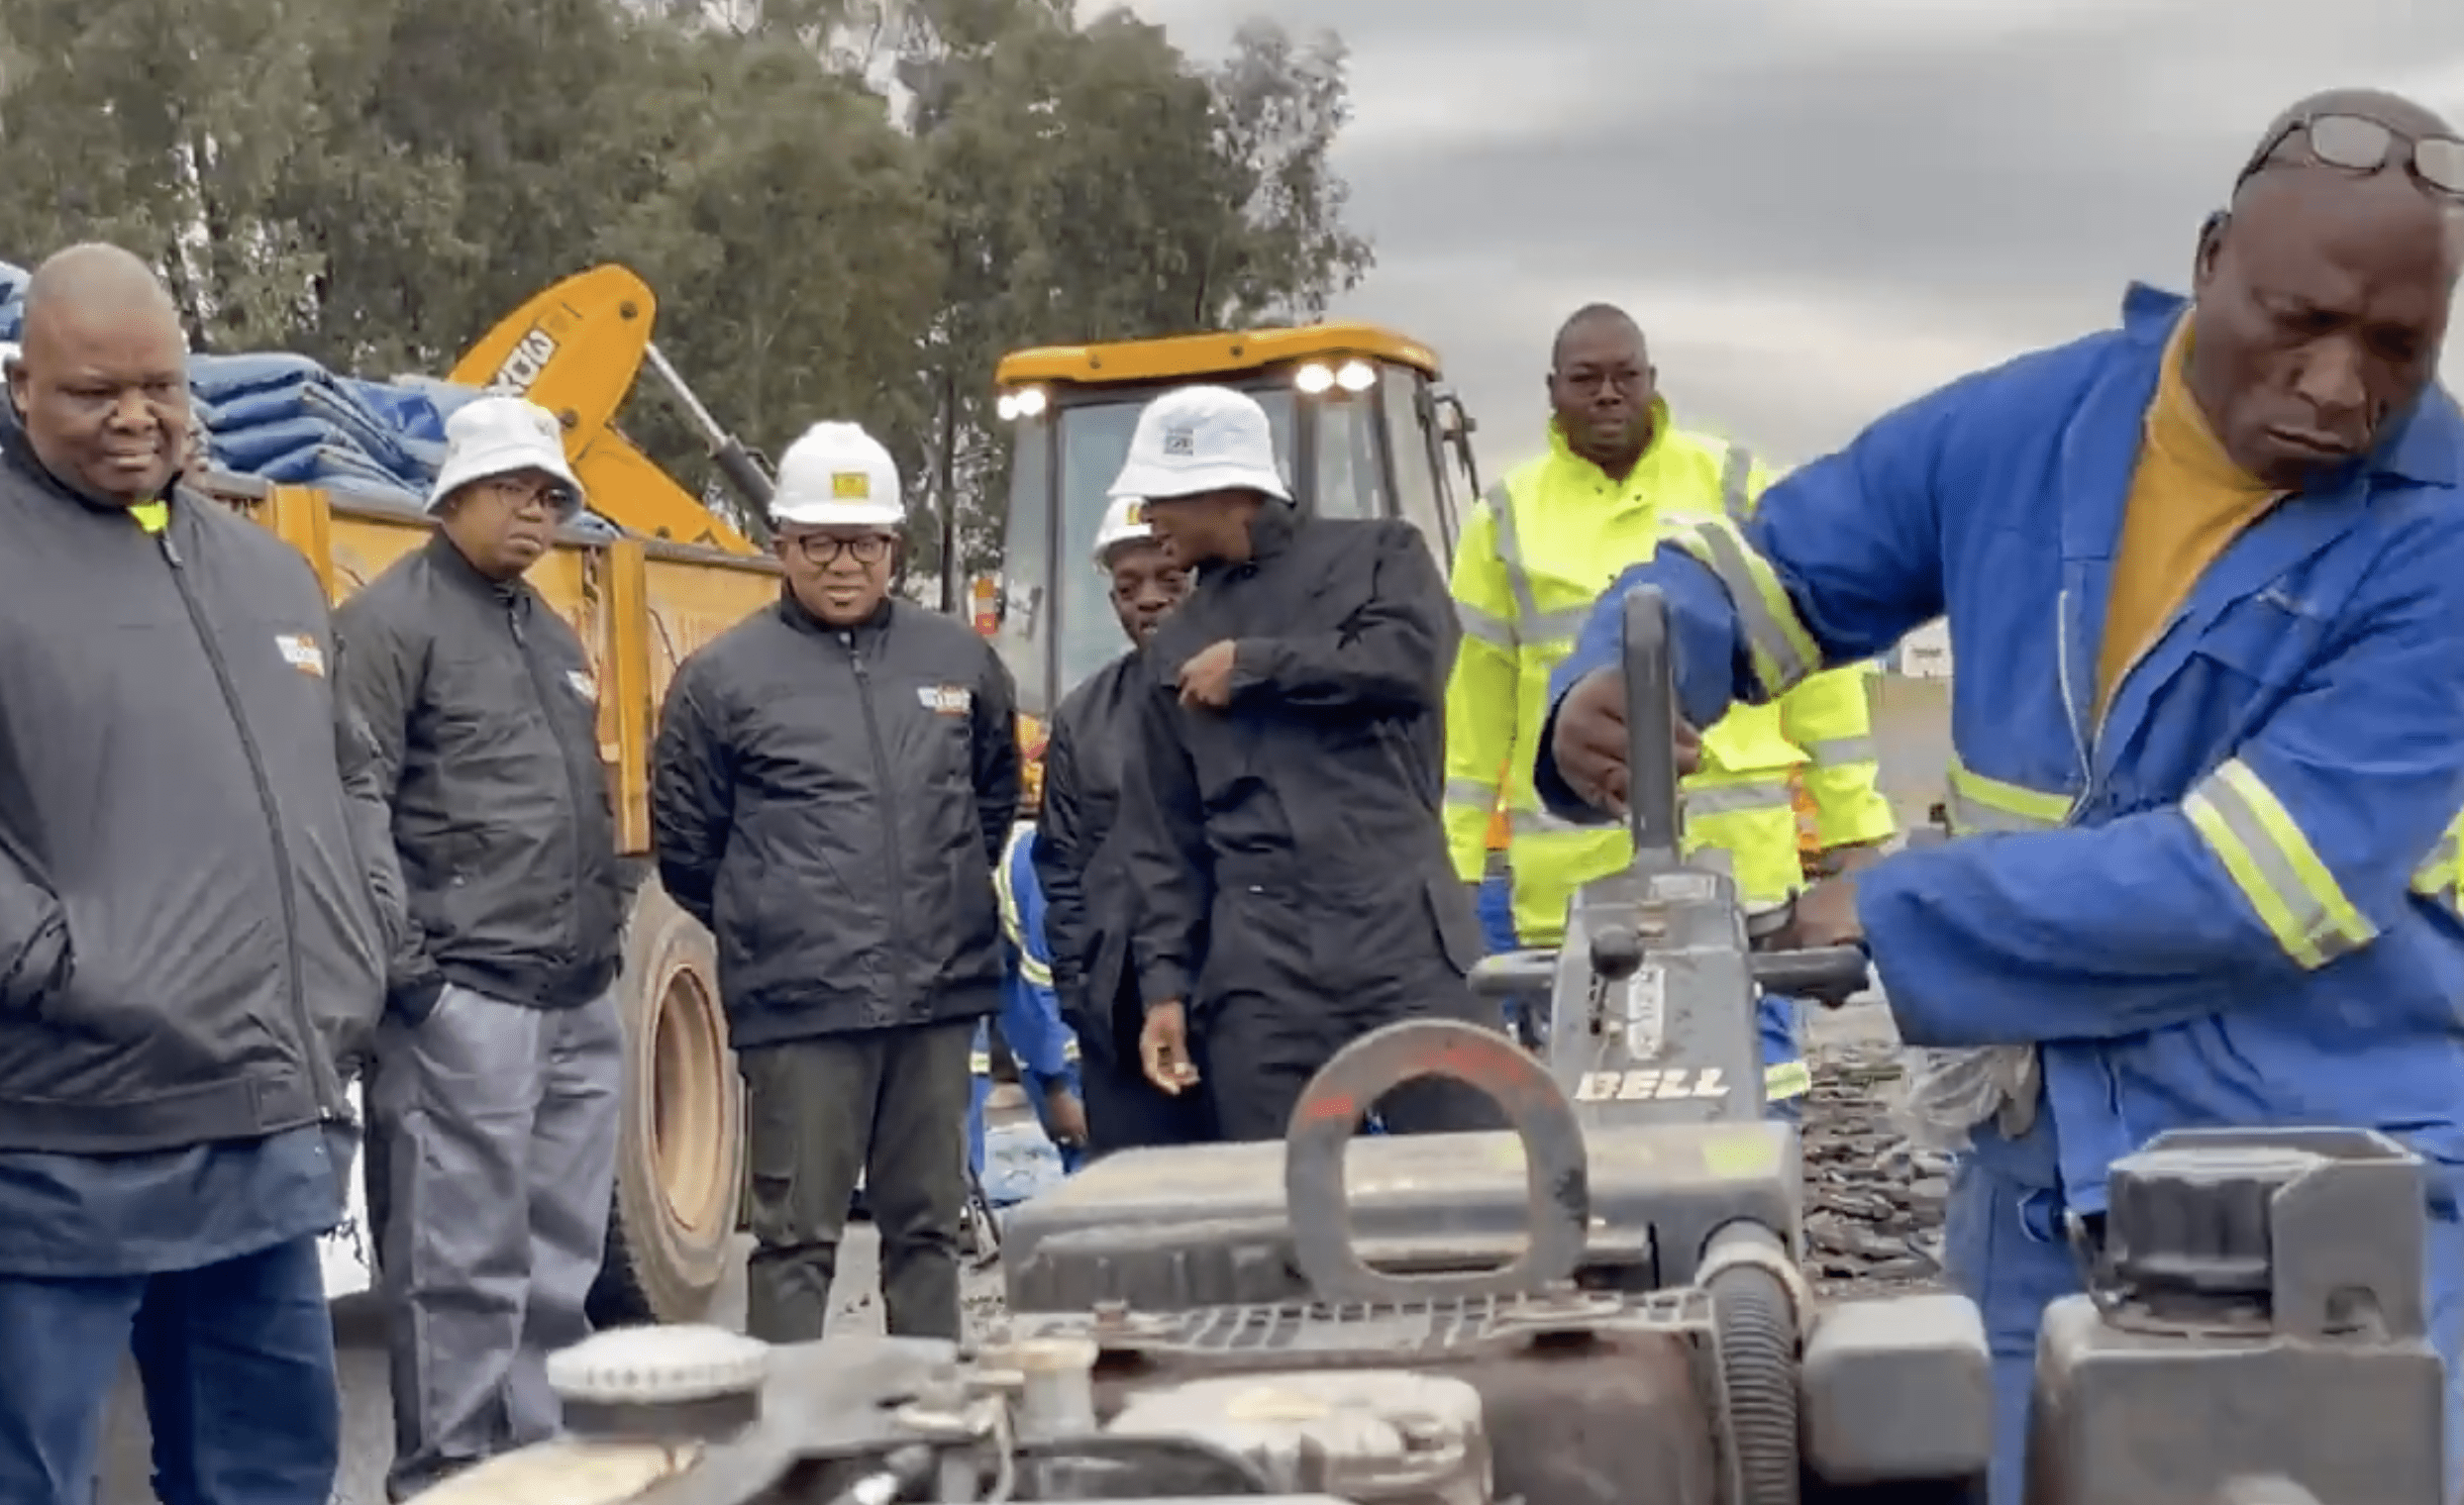 “Operation Vala Zonke”: Department of Transport launches a National Potholes Campaign